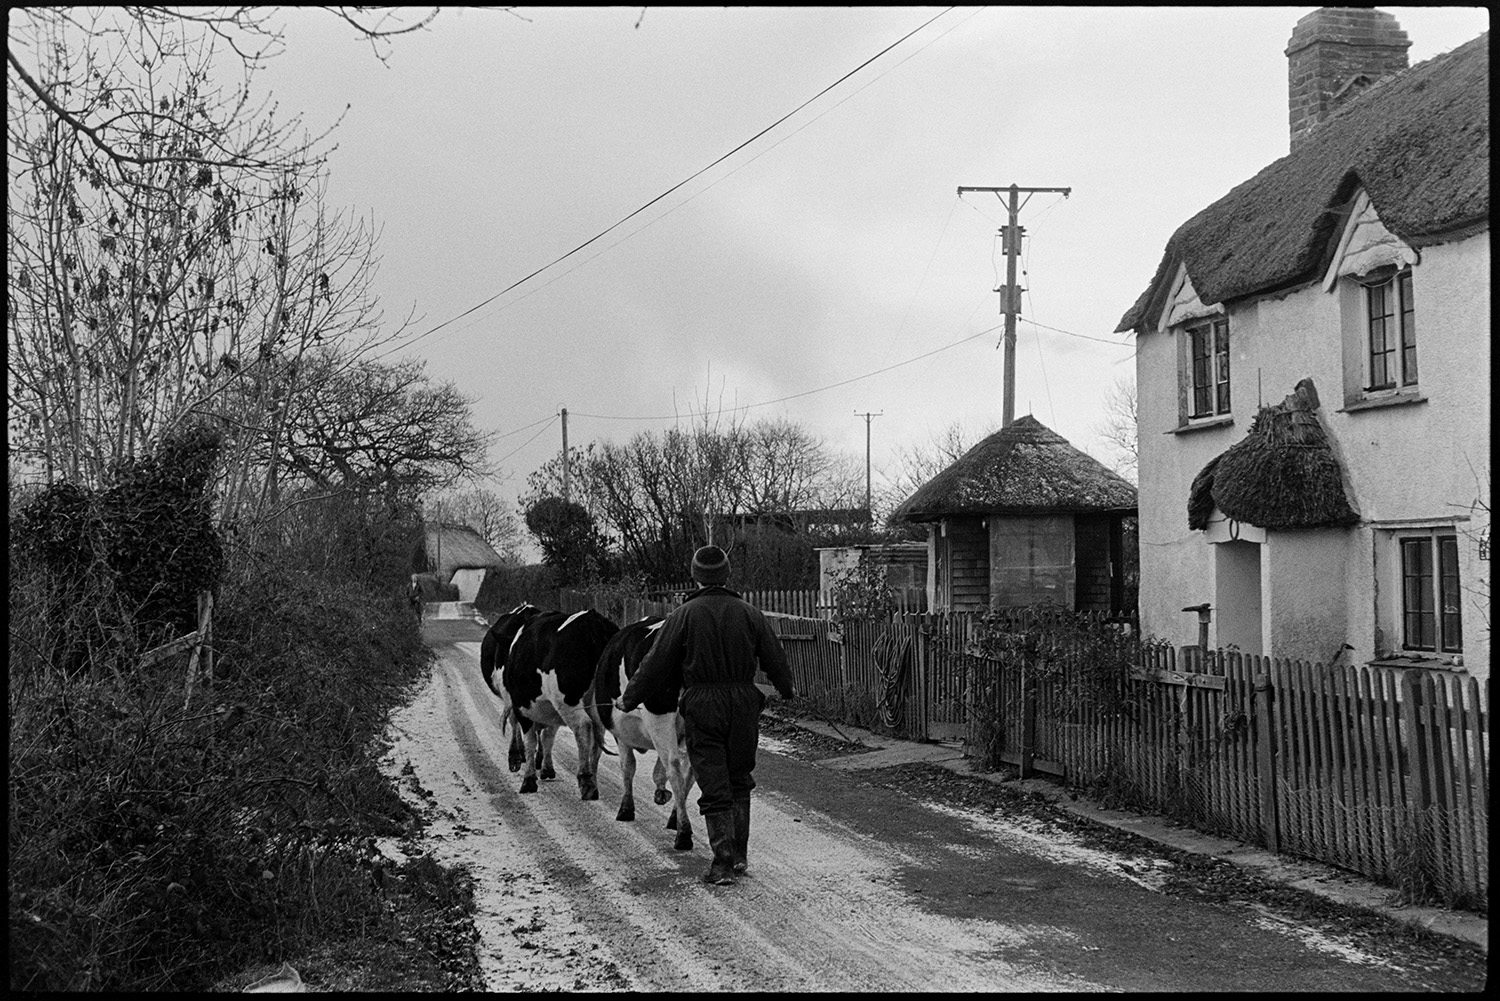 Milking herd of cows going through village. 
[Fred Folland herding three dairy cows along a road past a thatched cottage with a wooden fence outside, at Upcott, Dolton, to go to be milked. The road ahs a light dusting on snow.]